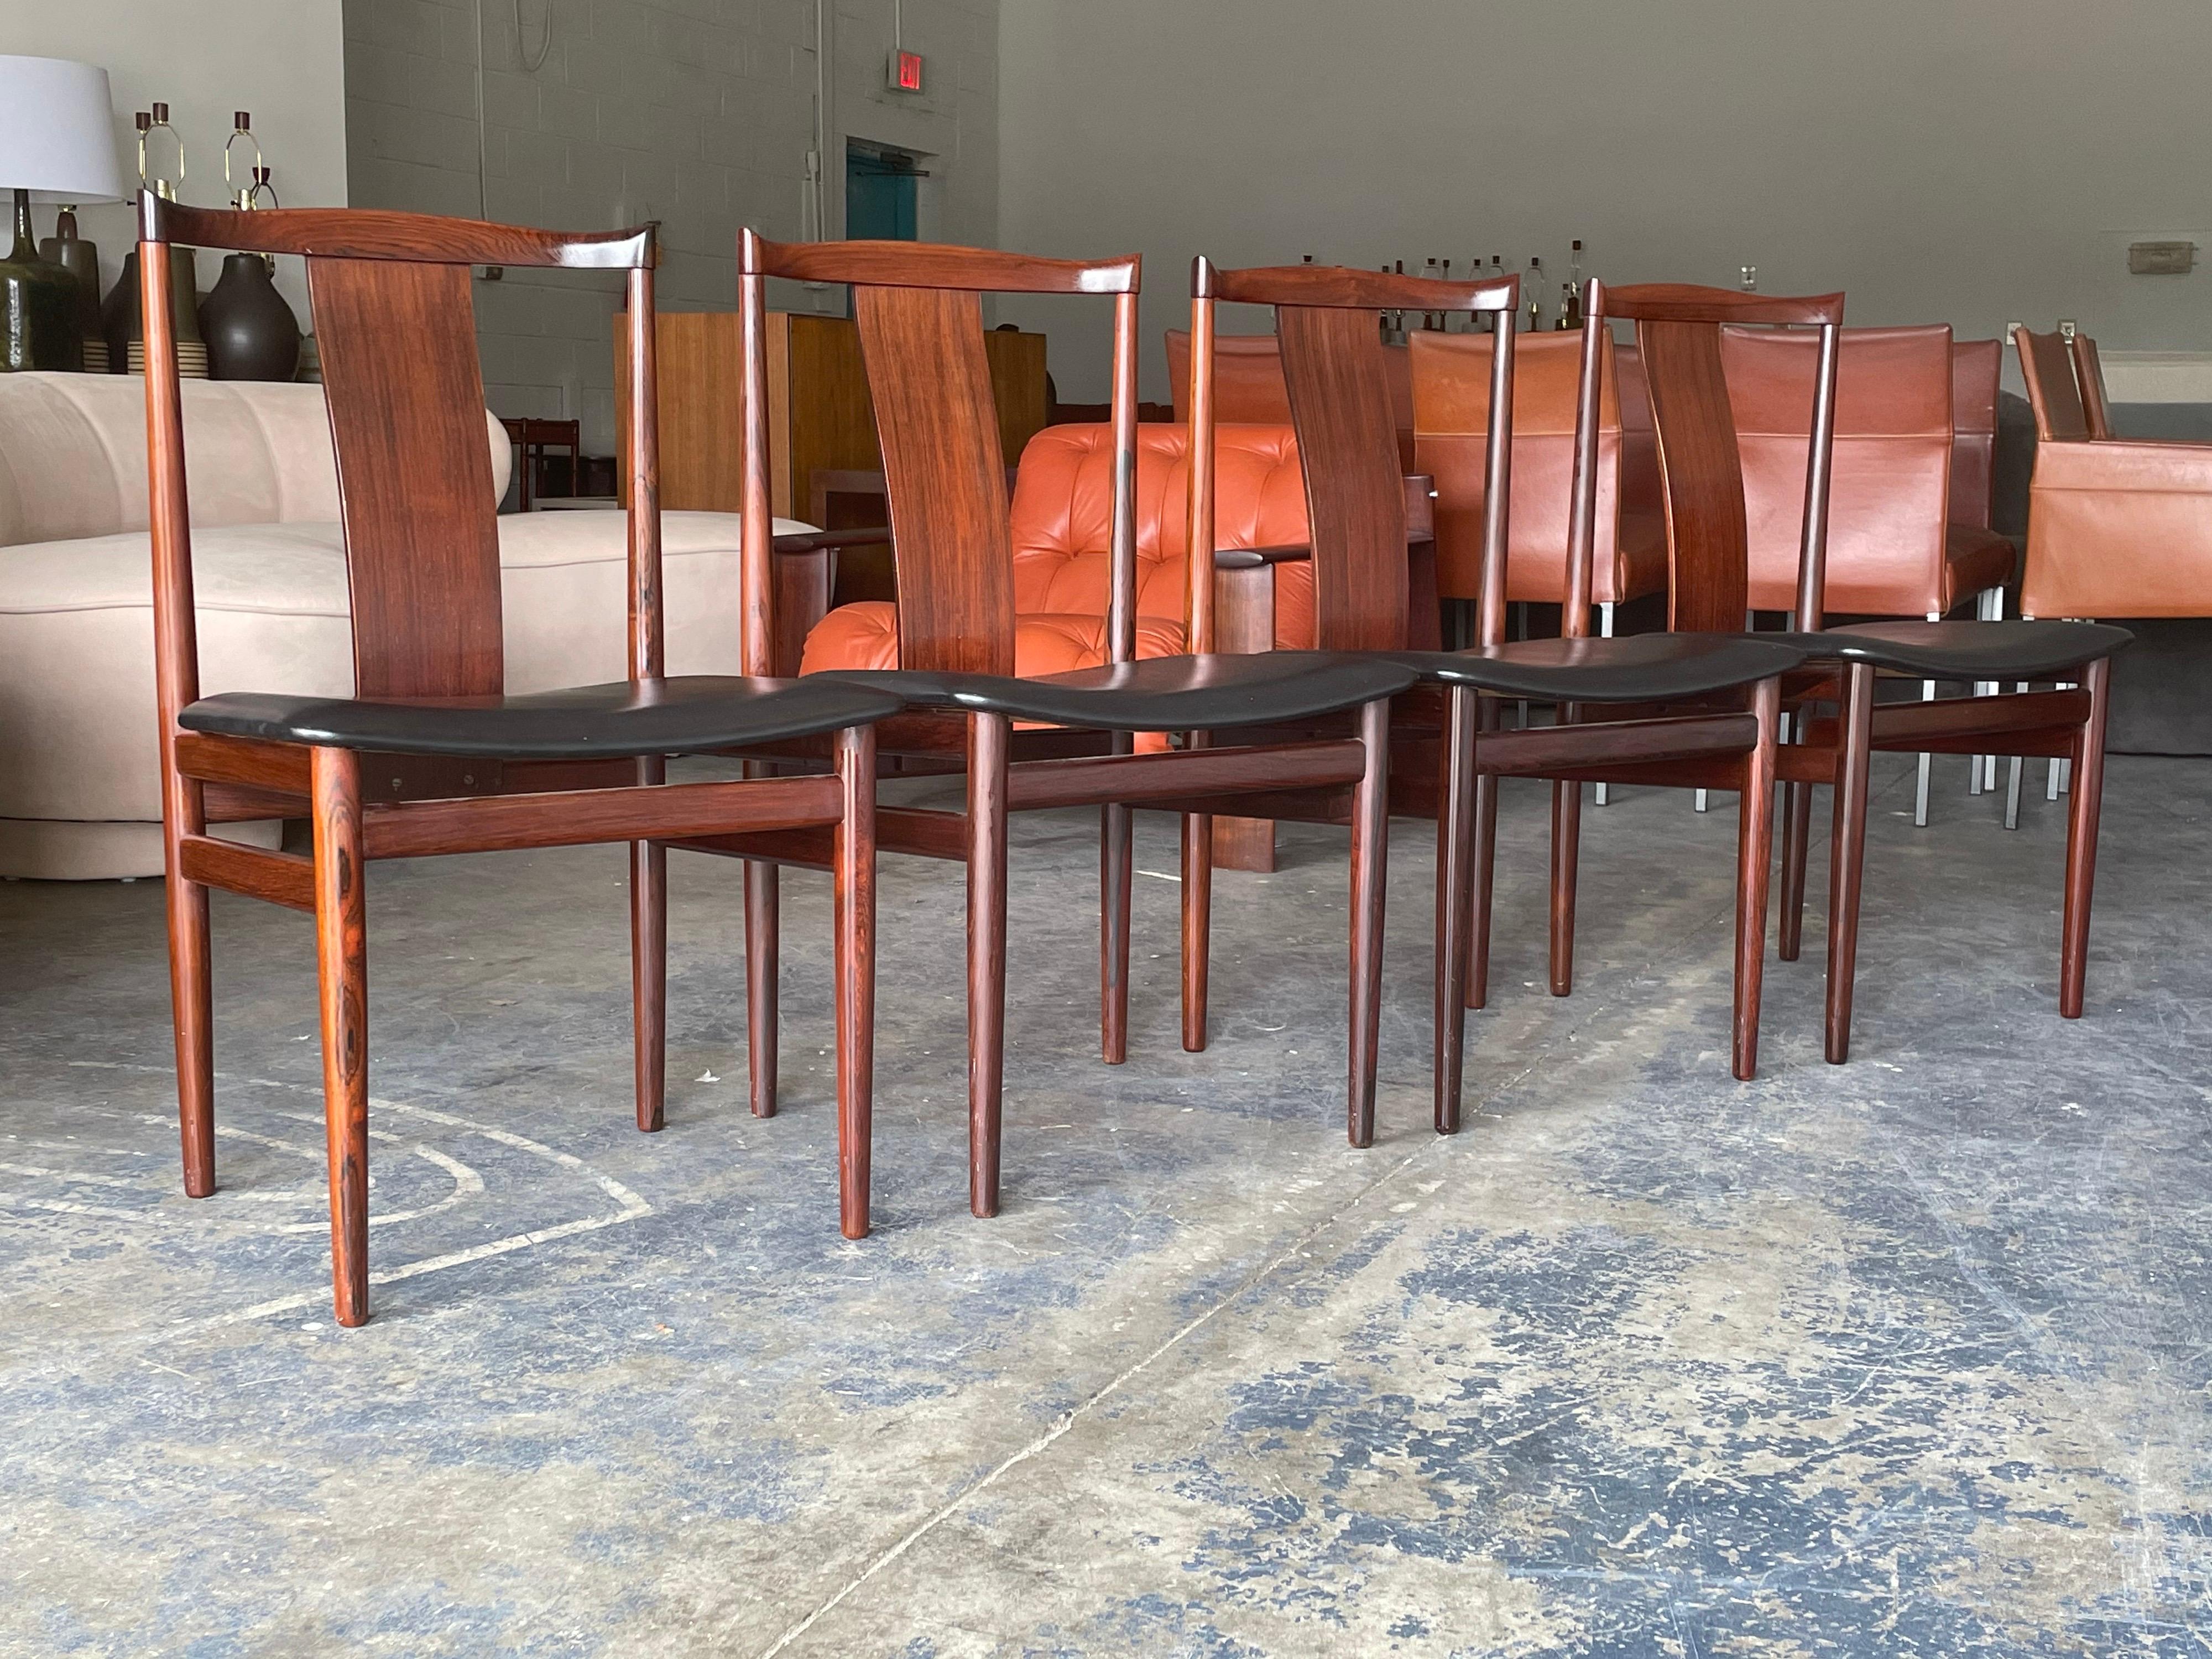 Uncommon set of dining chairs designed by Henning Sorenson. Well constructed, elegant chairs with black vinyl seats. Original condition.